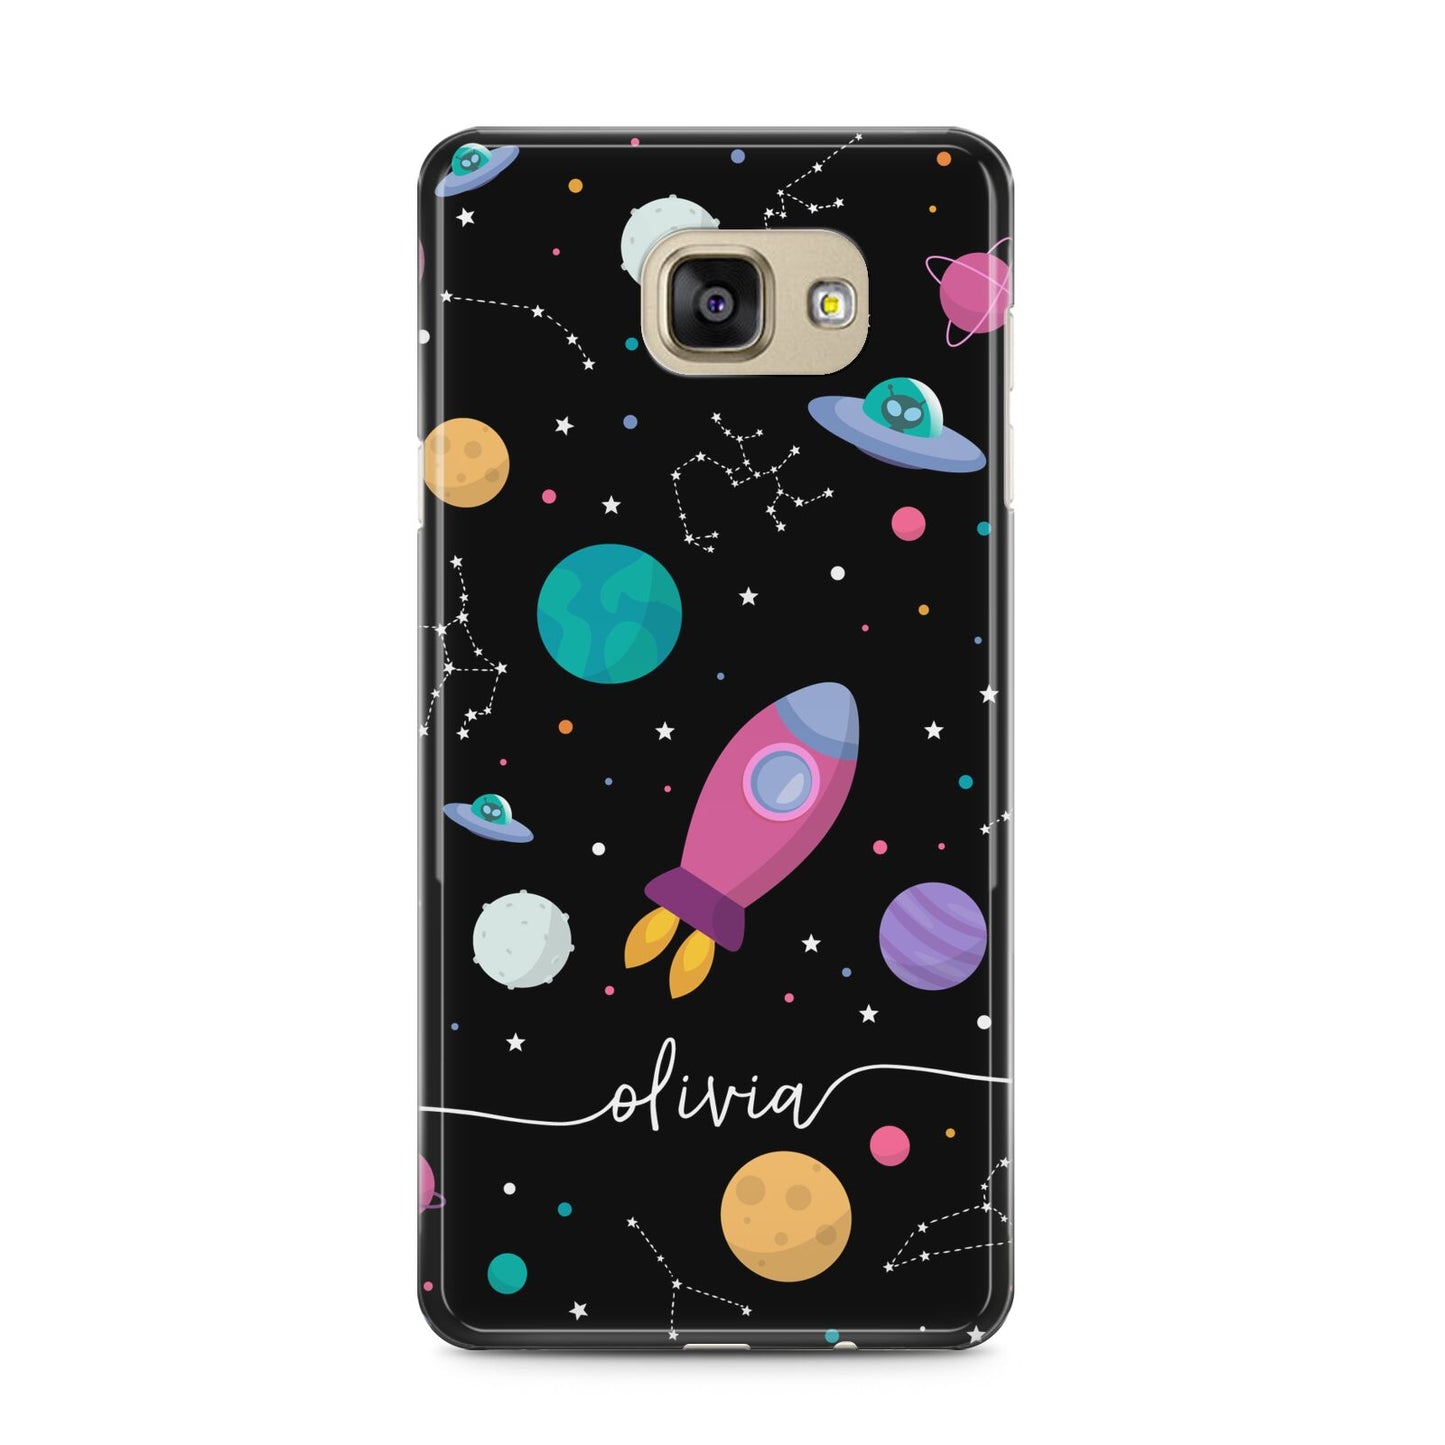 Galaxy Artwork with Name Samsung Galaxy A5 2016 Case on gold phone